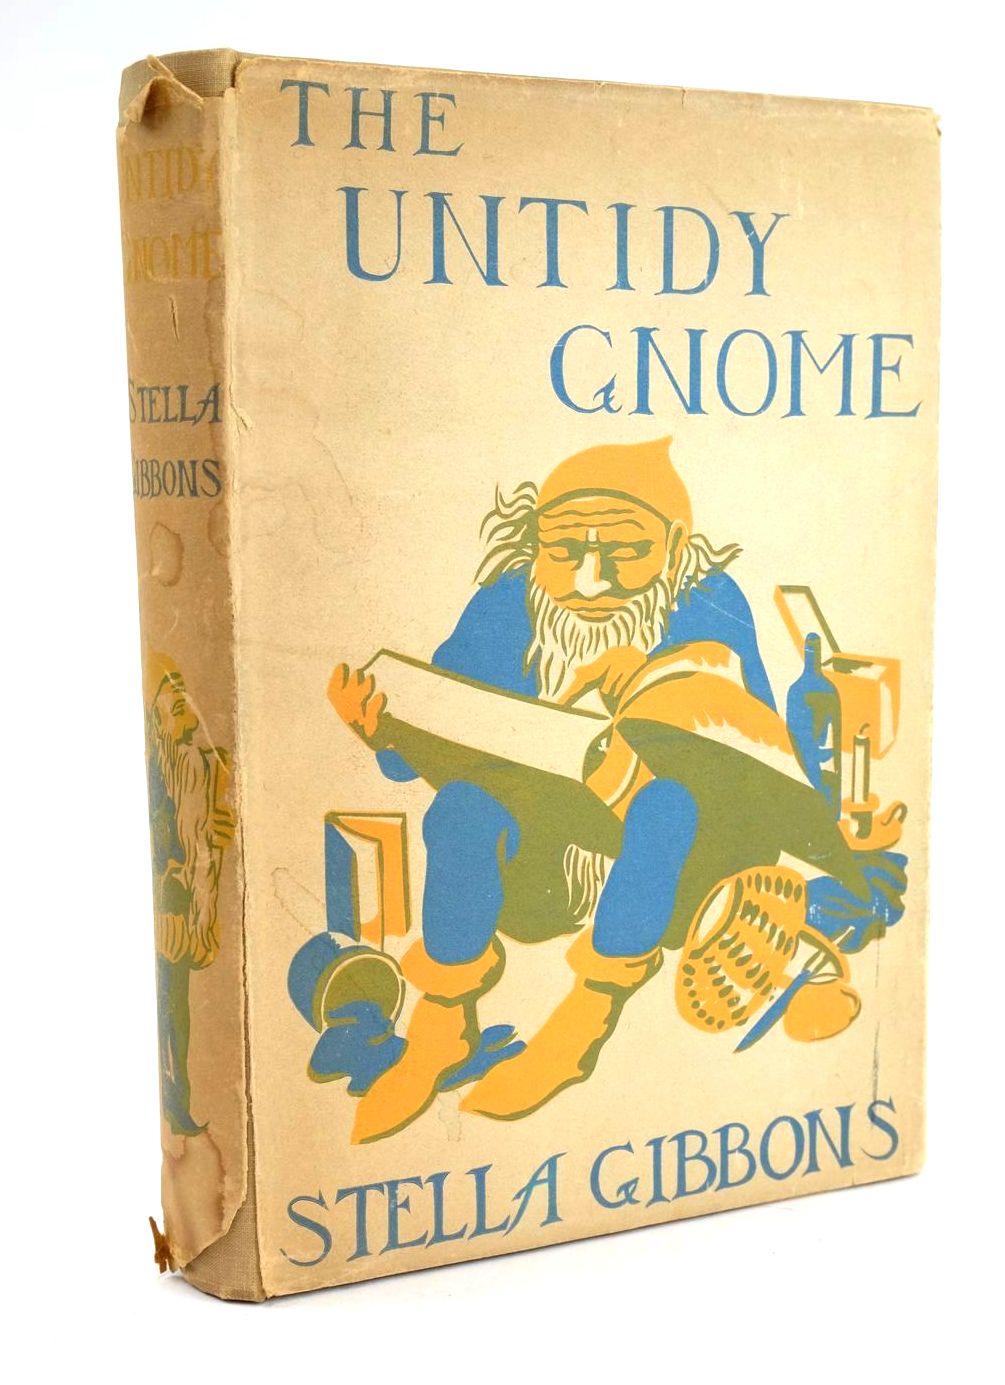 Photo of THE UNTIDY GNOME written by Gibbons, Stella illustrated by Townsend, William published by Longmans, Green & Co. (STOCK CODE: 1324616)  for sale by Stella & Rose's Books